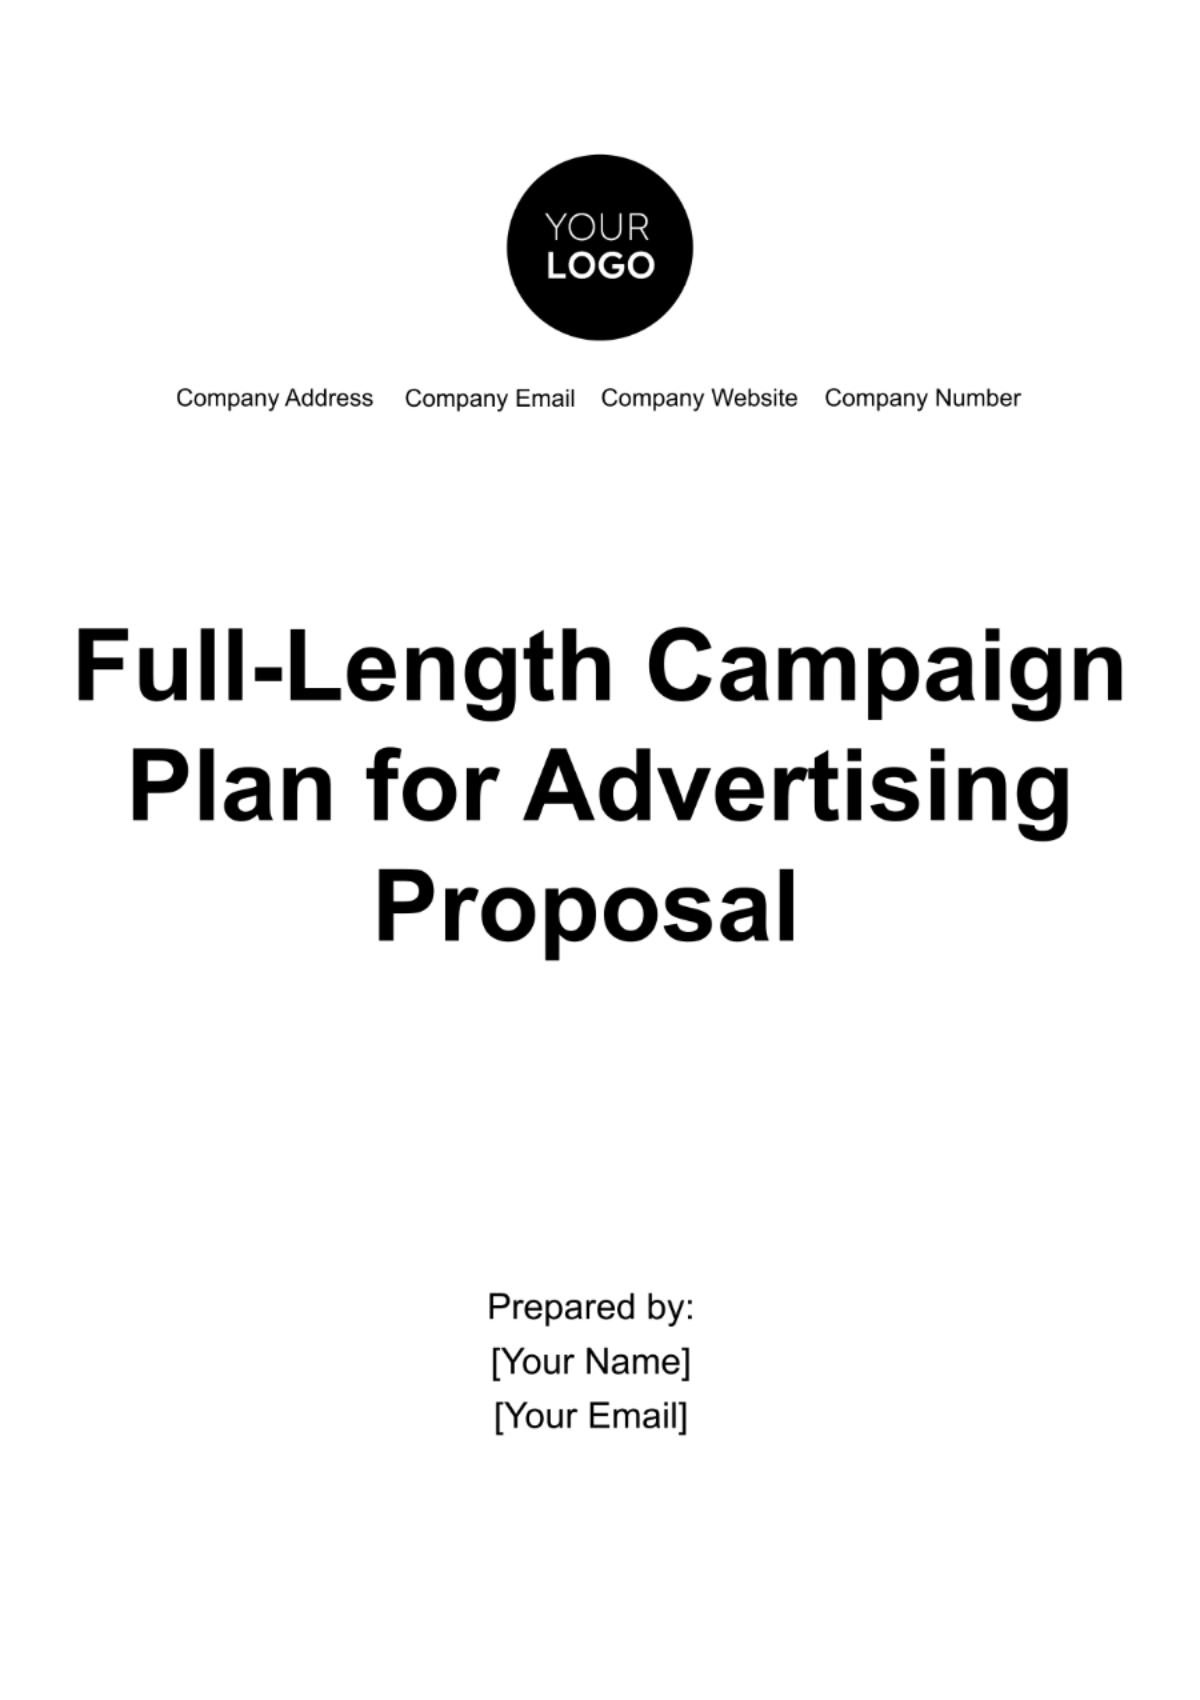 Free Full-Length Campaign Plan for Advertising Proposal Template